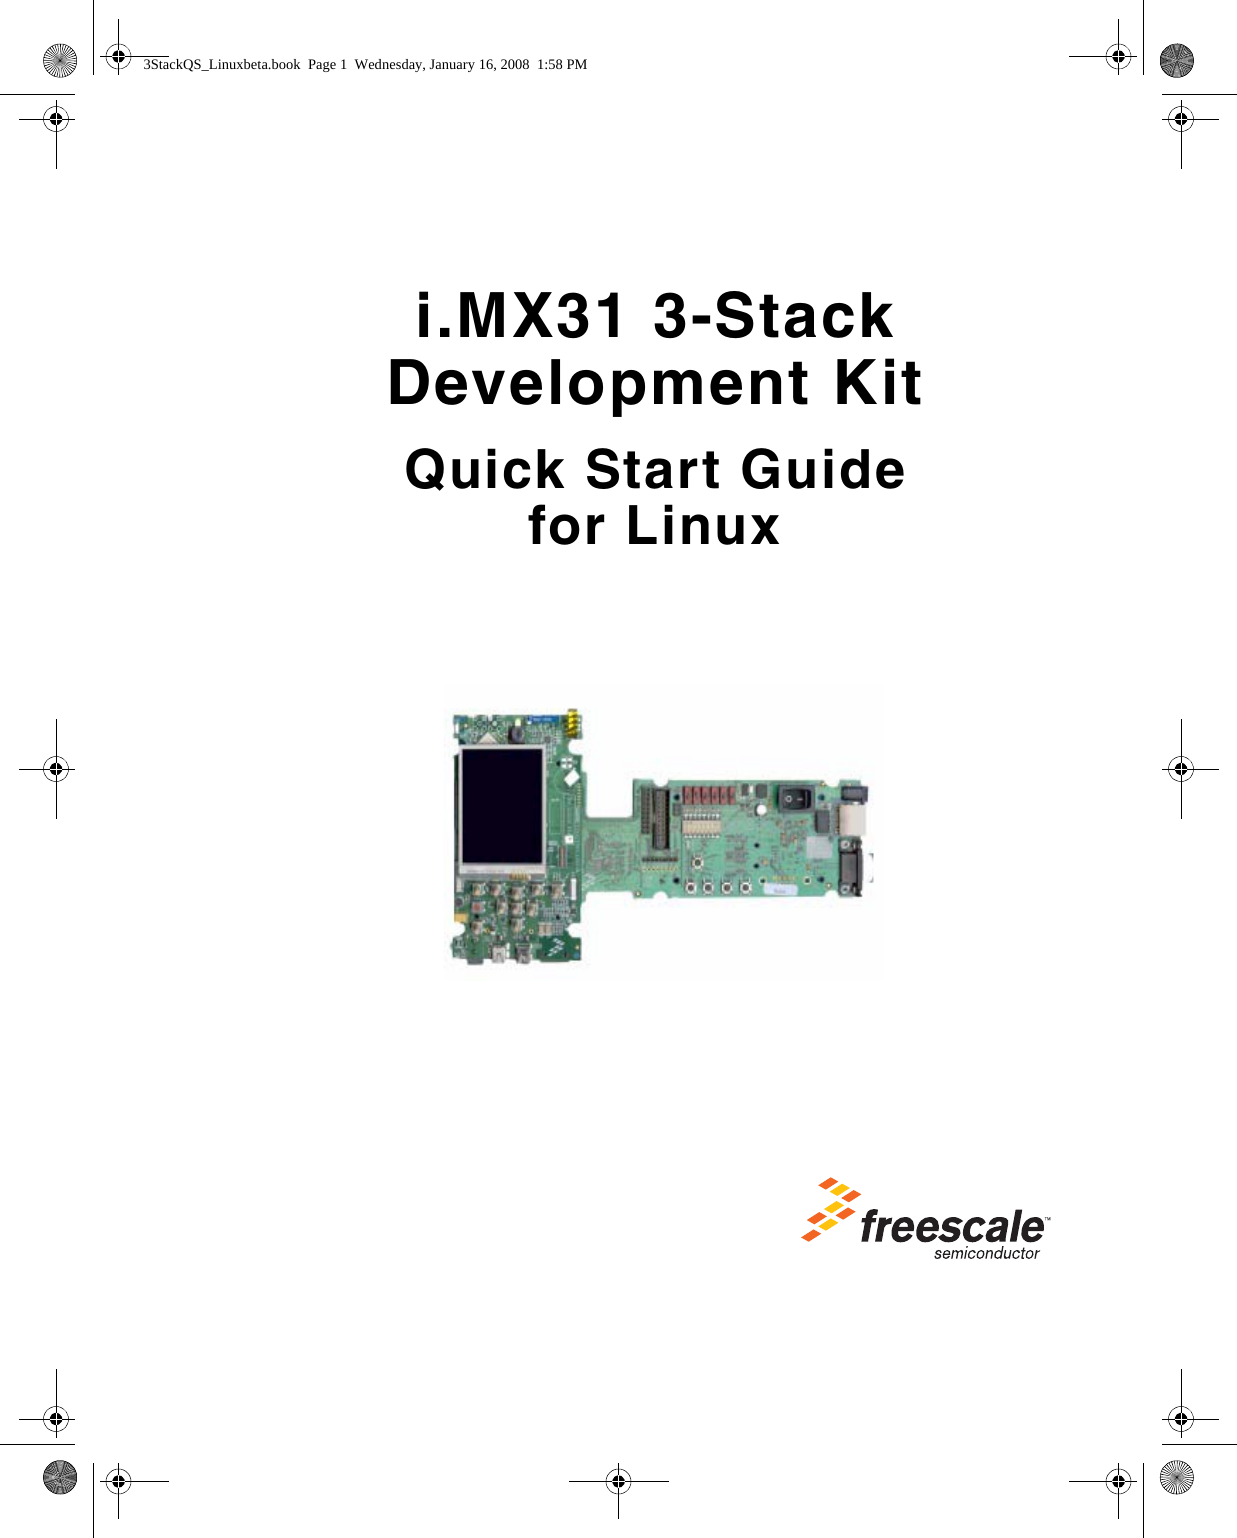 i.MX31 3-Stack Development KitQuick Start Guidefor Linux  3StackQS_Linuxbeta.book  Page 1  Wednesday, January 16, 2008  1:58 PM